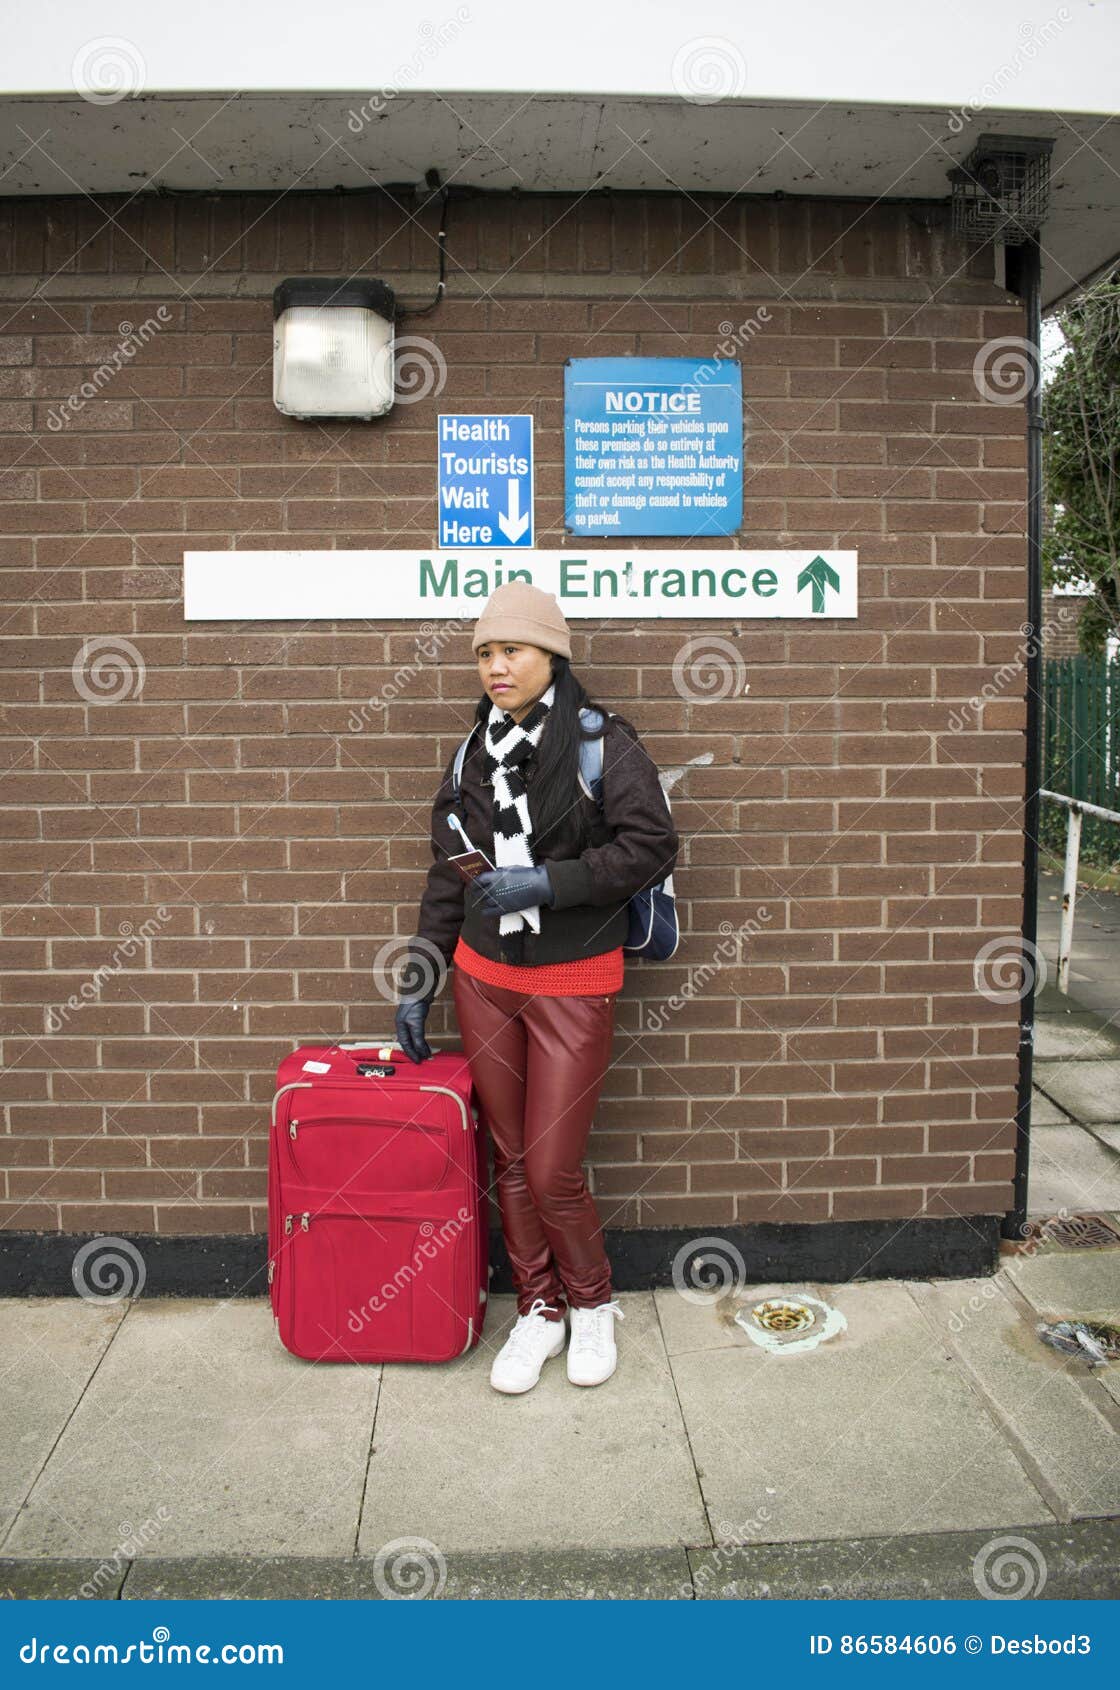 asian nhs health tourist with sign above